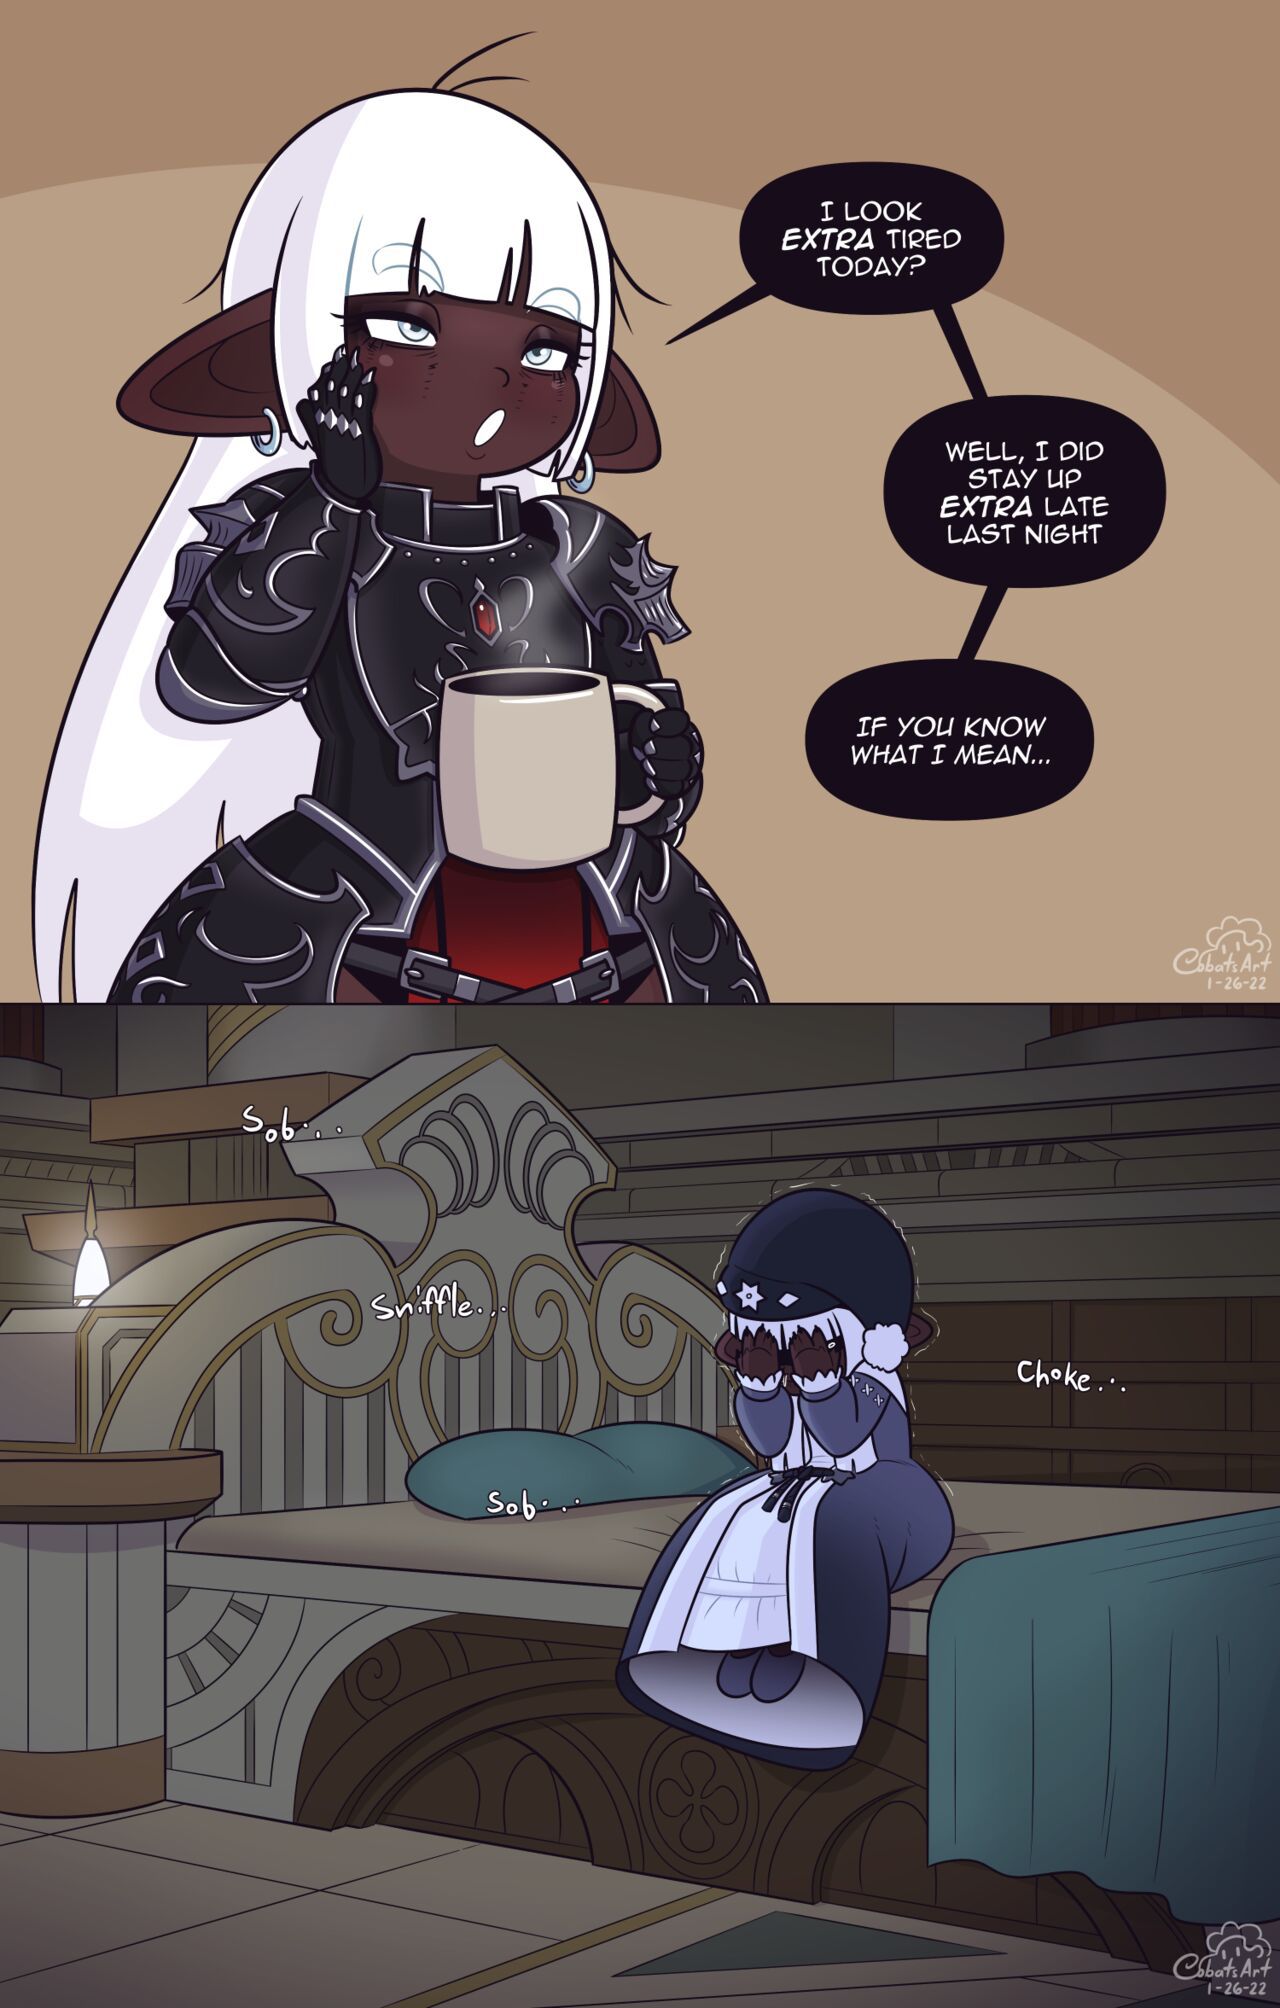 [Cobatsart] Mary Muffin: DRK Chocolate Cake (Final Fantasy XIV) Ongoing 7